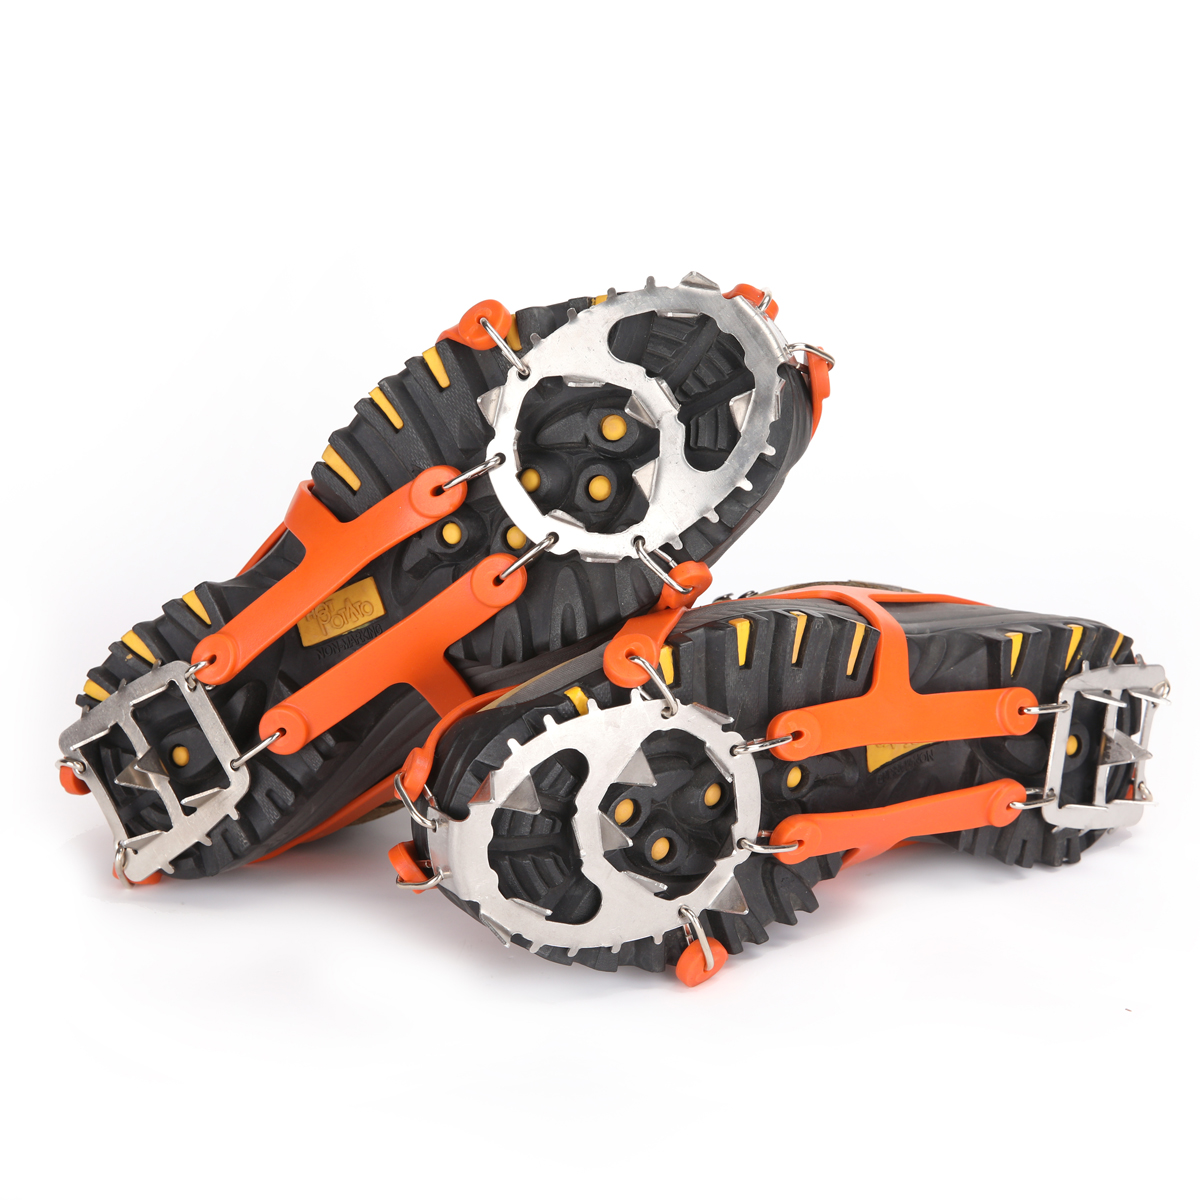 

1Pair Ice Snow 18 Crampons Anti-slip Climbing Gripper Shoe Covers Spike Cleats